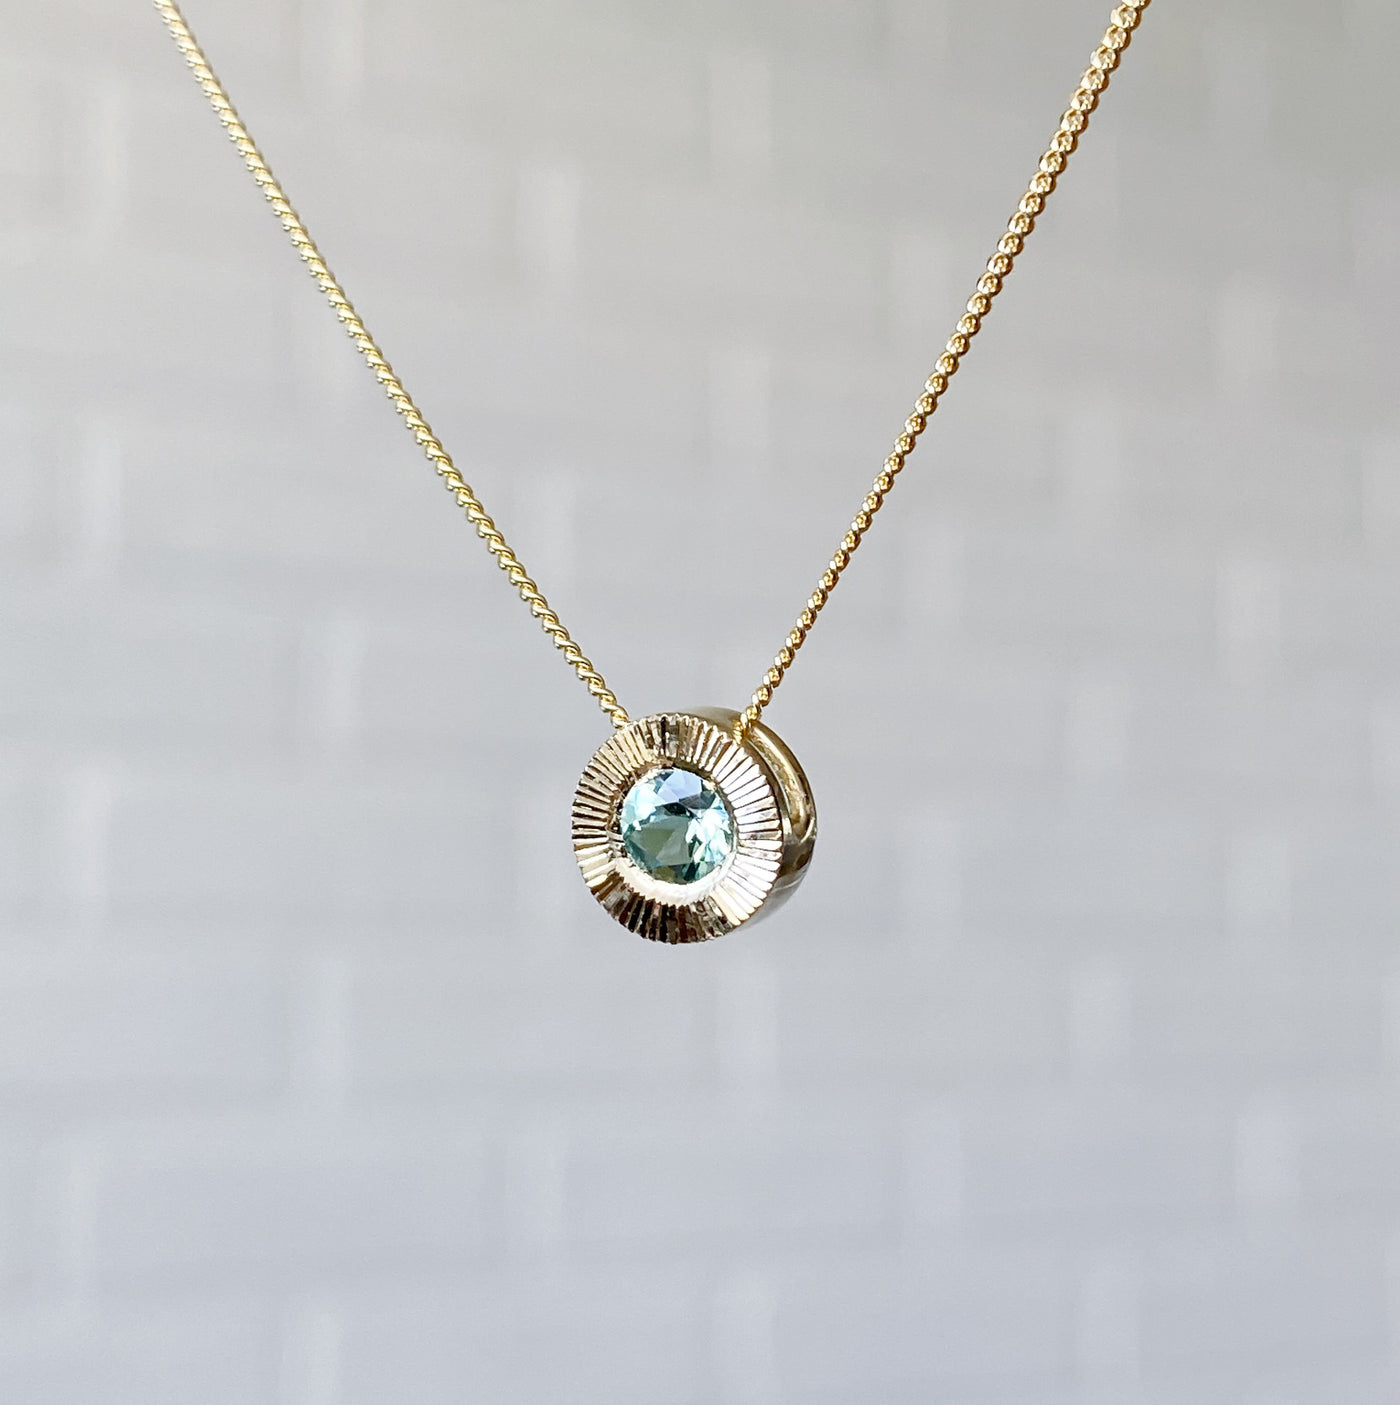 Side view 14k yellow gold medium Aurora necklace with a round seafoam green tourmaline center and engraved rays halo border in natural light